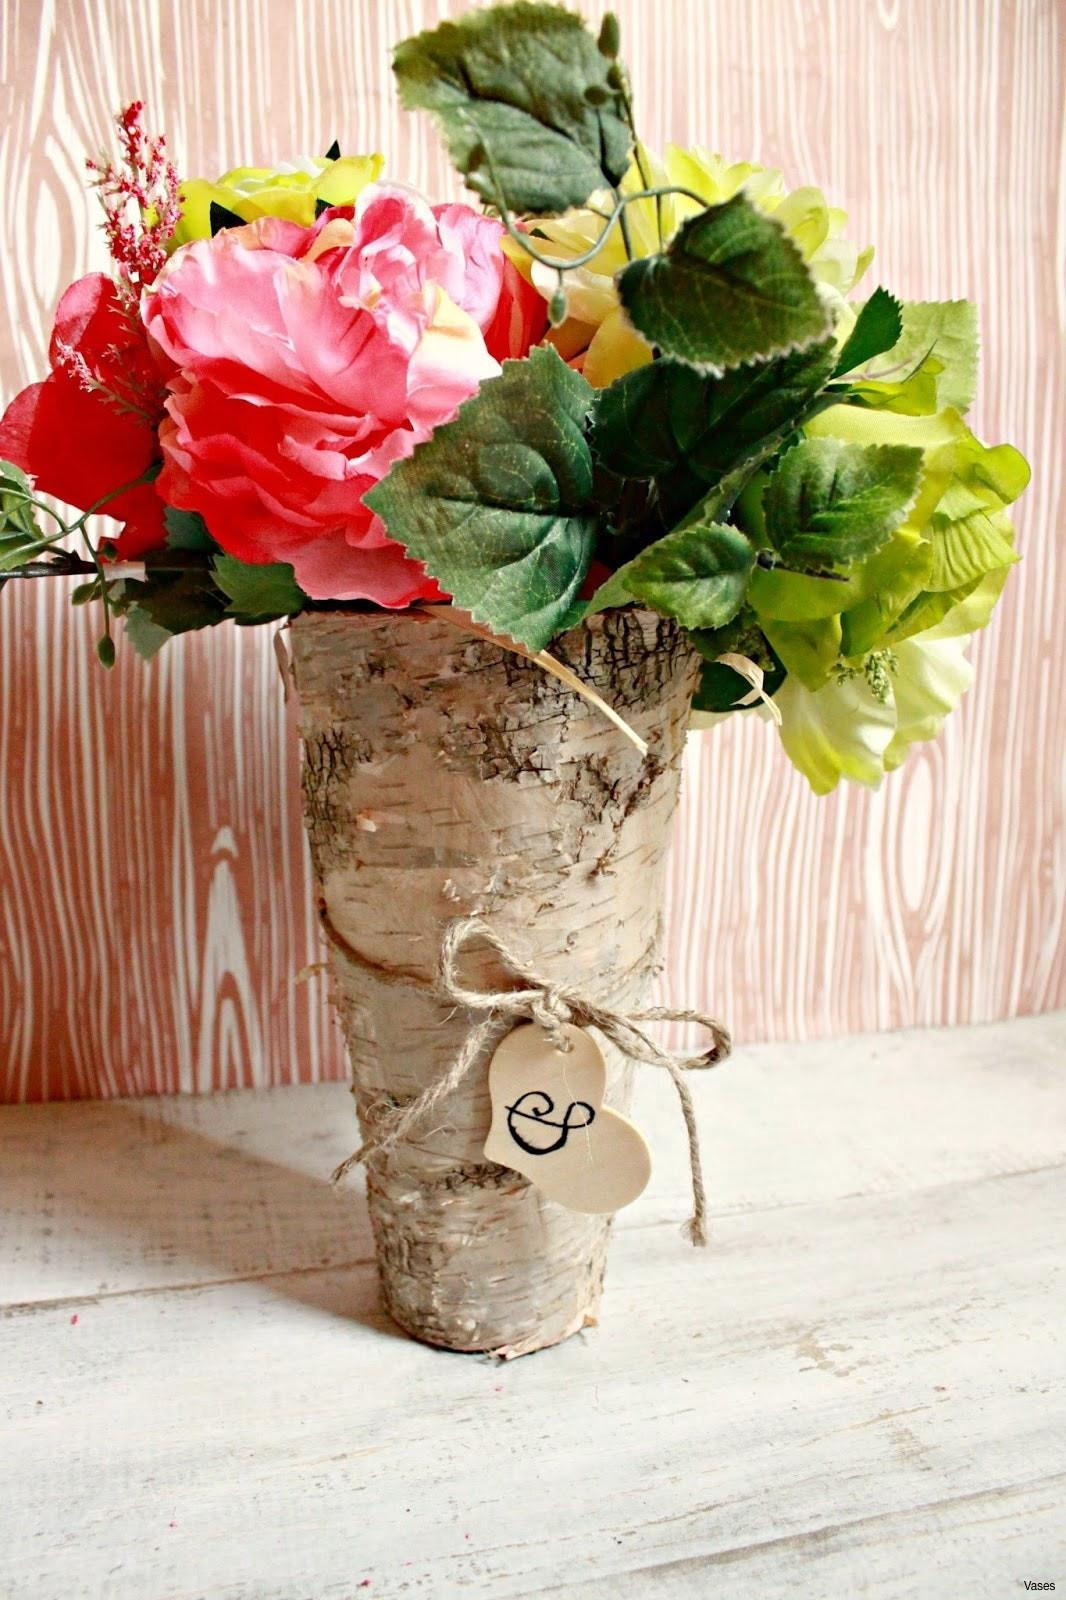 25 Trendy Baby Shower Vases 2024 free download baby shower vases of diy wedding ideas on a budget fresh flowers and decorations for for diy wedding ideas on a budget fresh flowers and decorations for weddings h vases diy wood